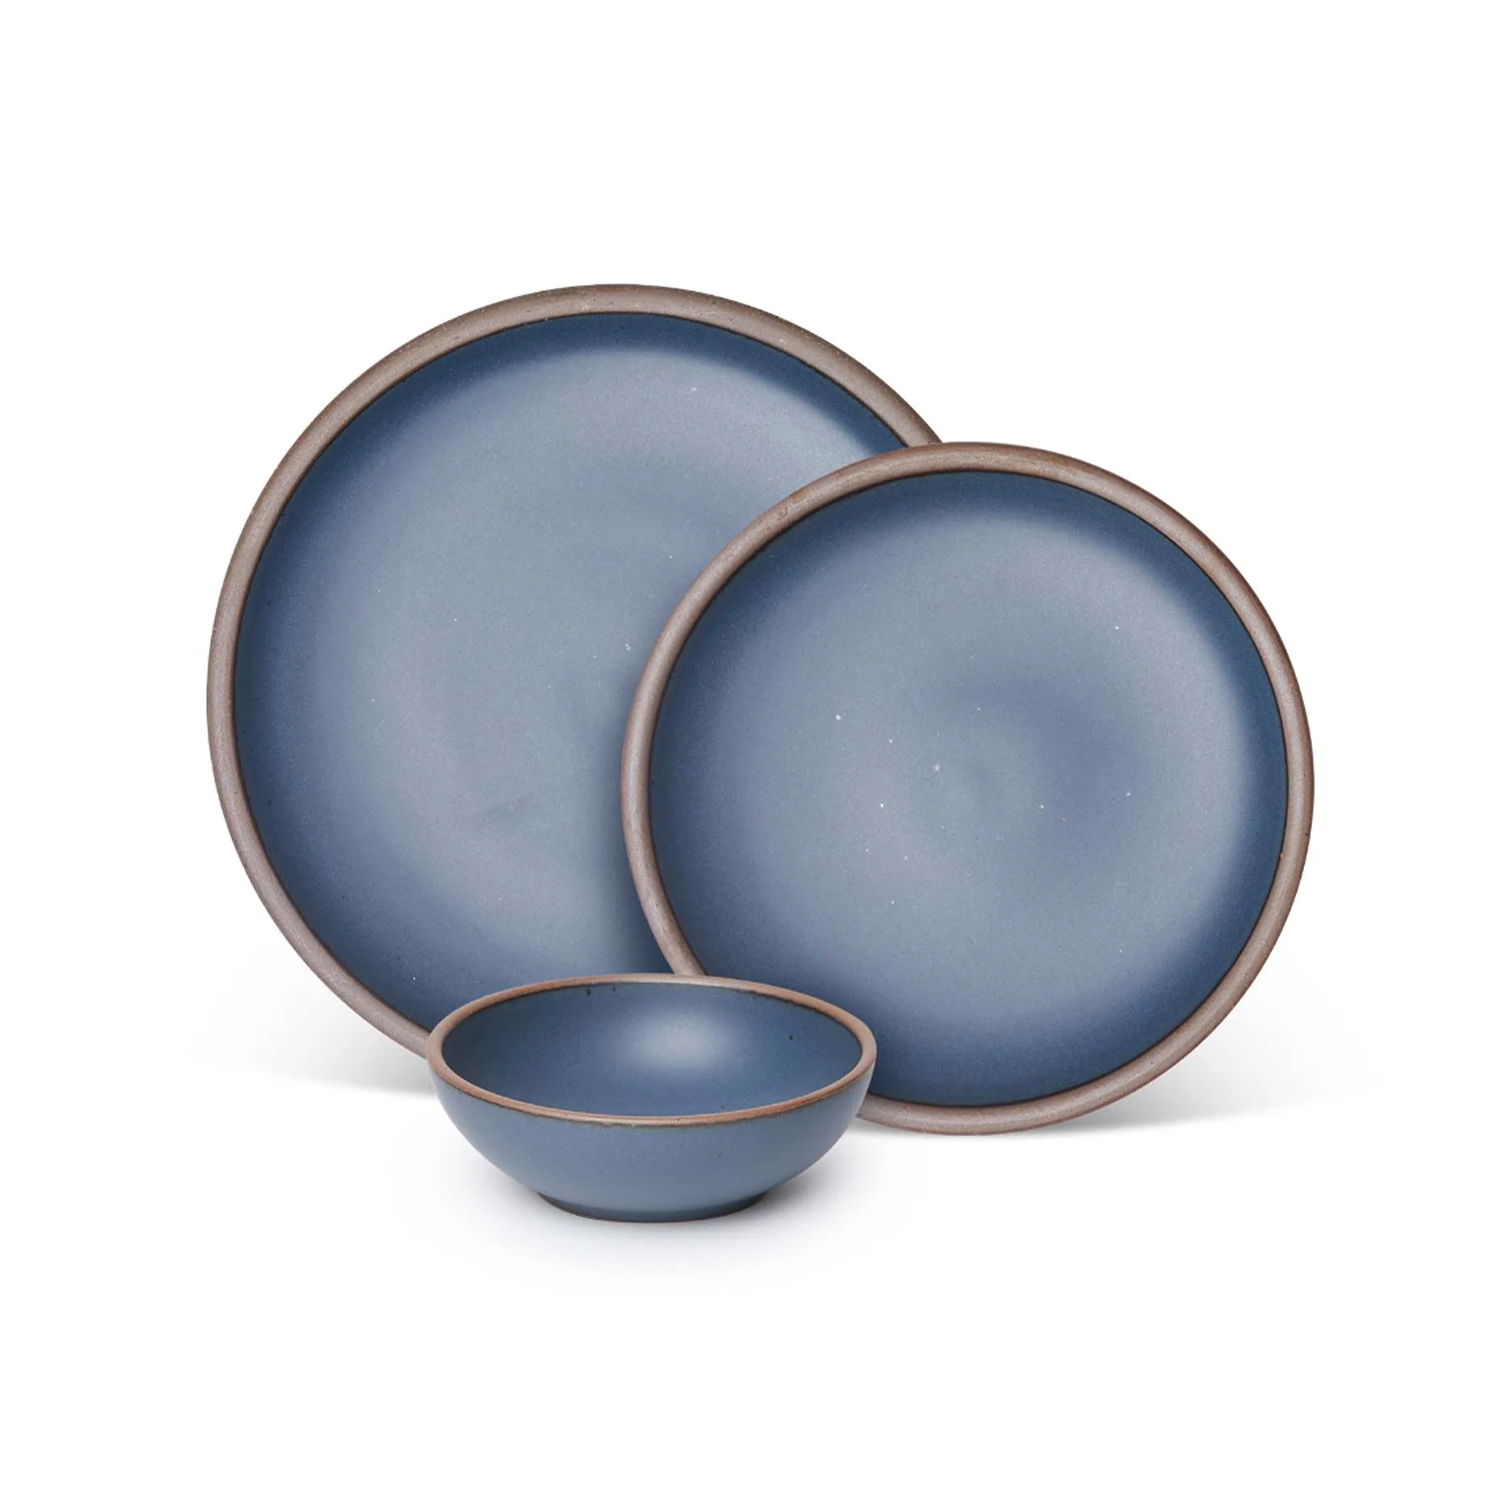 two plates and a shallow bowl in blue